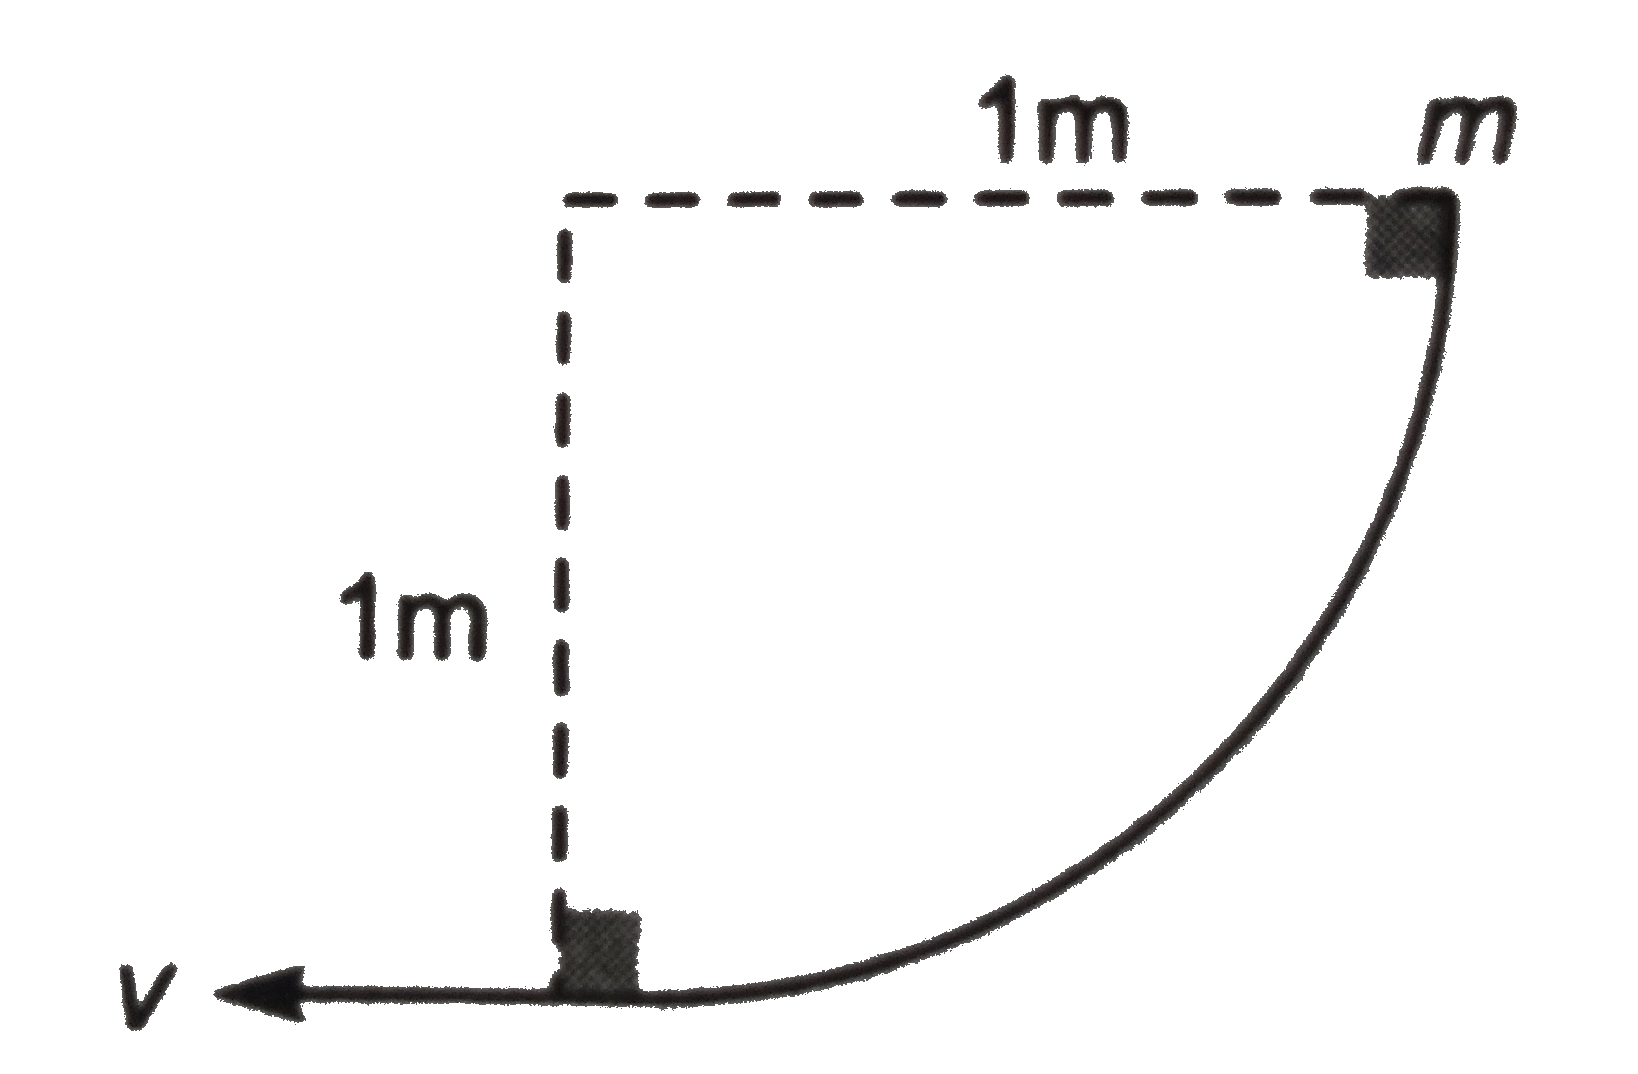 A block of mass 1kg slides down a curved track which forms one quadrant of a circle of radius 1m as shown in figure. The speed of block at the bottom of track is v=2 ms^(-1). The work done by the of friction is   .